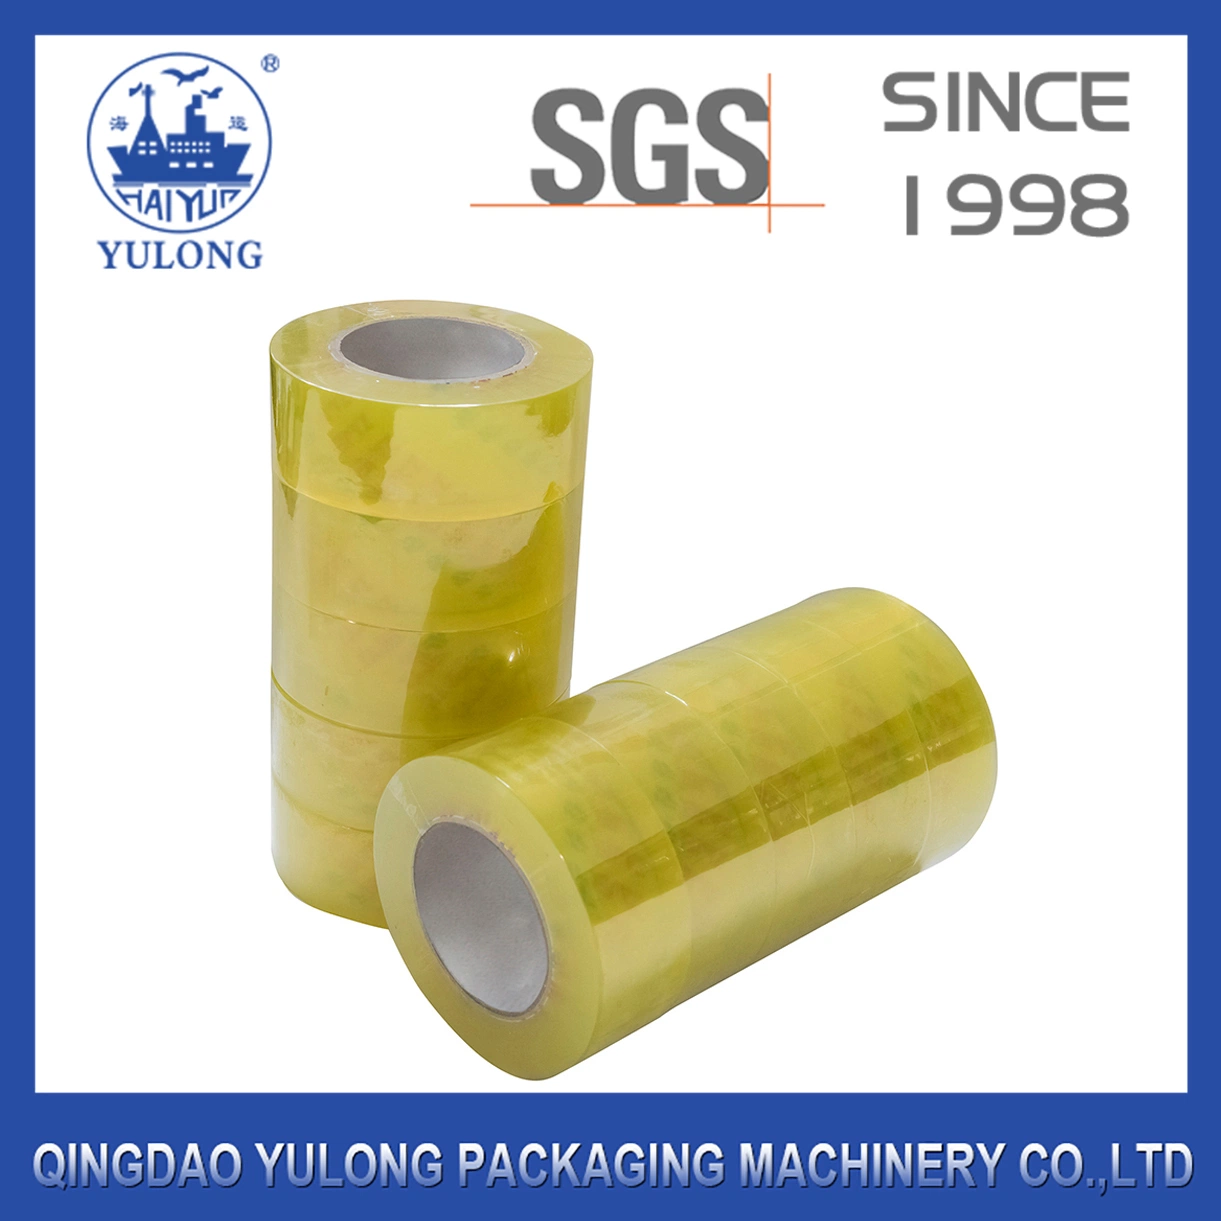 No Bubble/Packing/Stationery/ Adhesive /BOPP / Packaging Tape for Sealing Carton